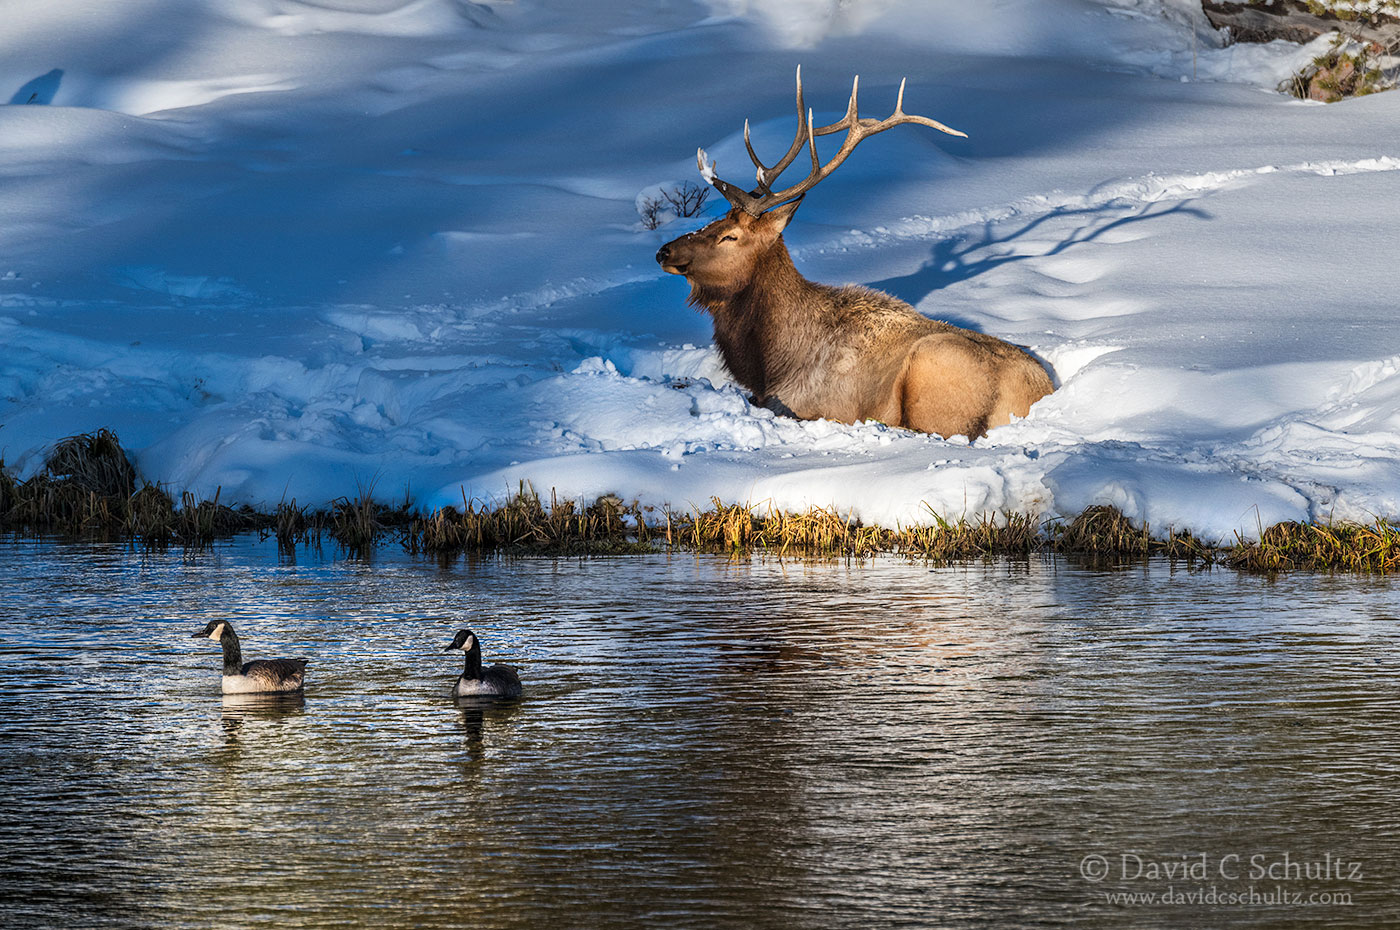 Bull elk and Canada Geese - Image #161-664